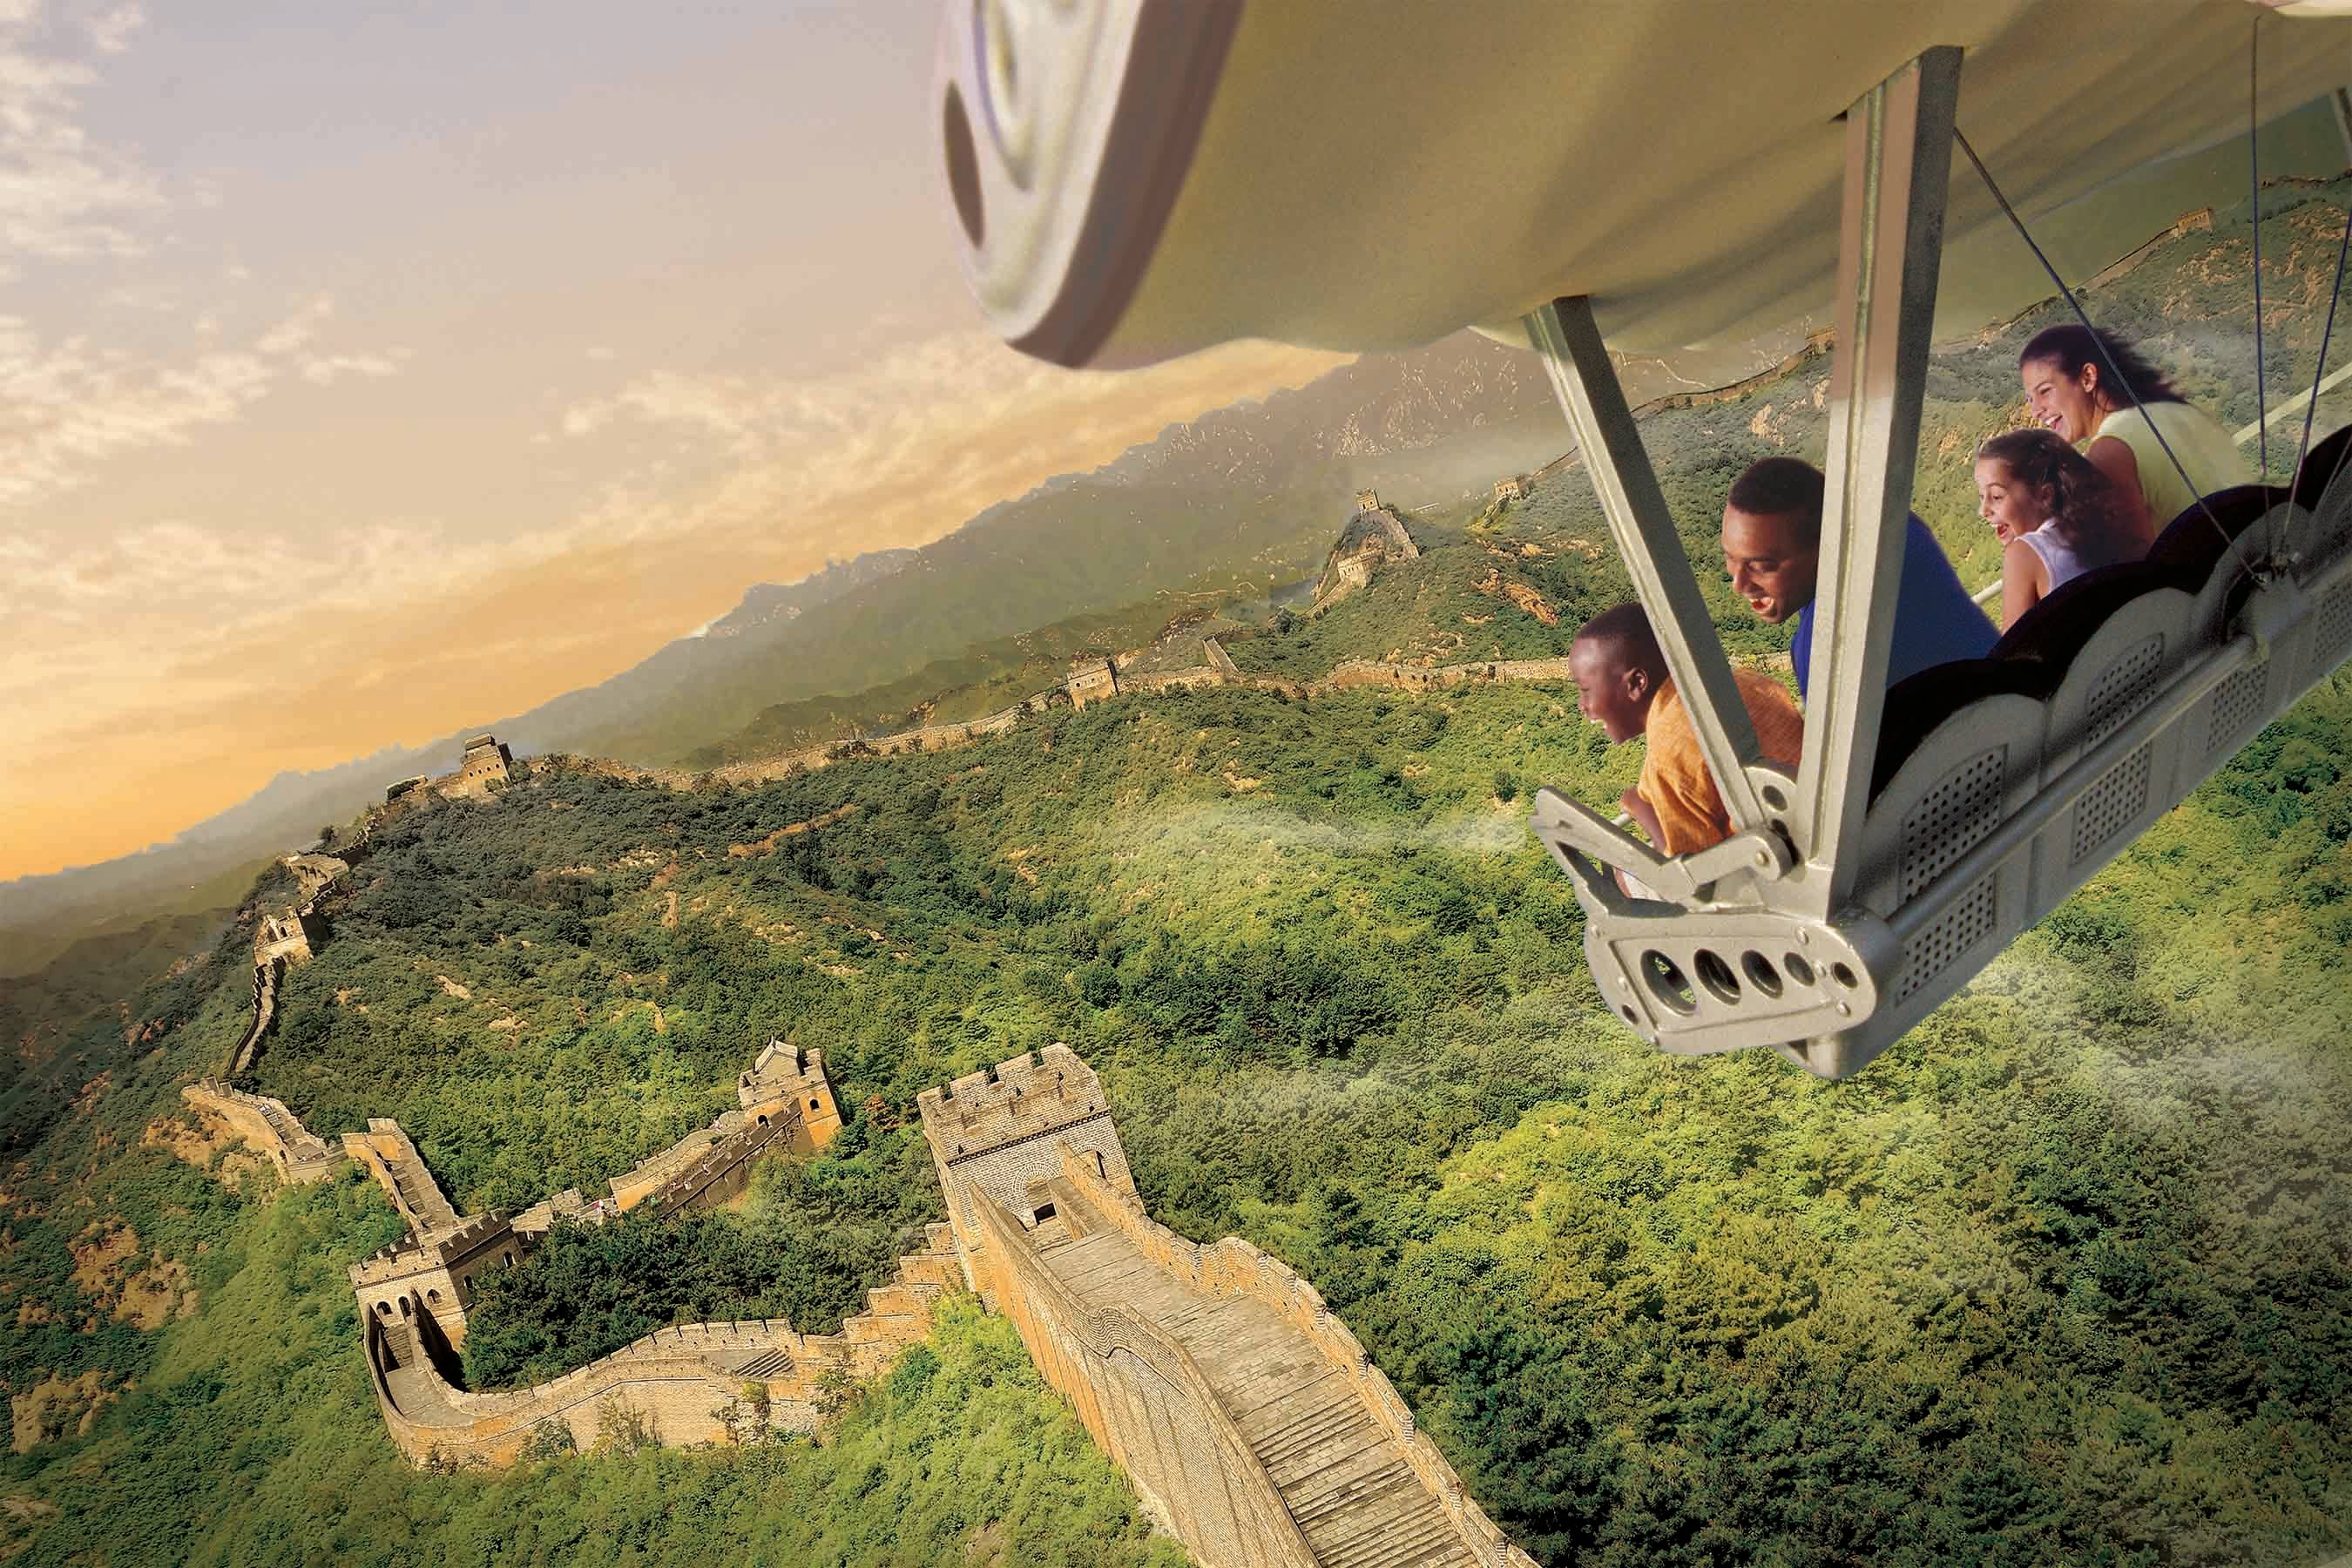 Soarin now officially open